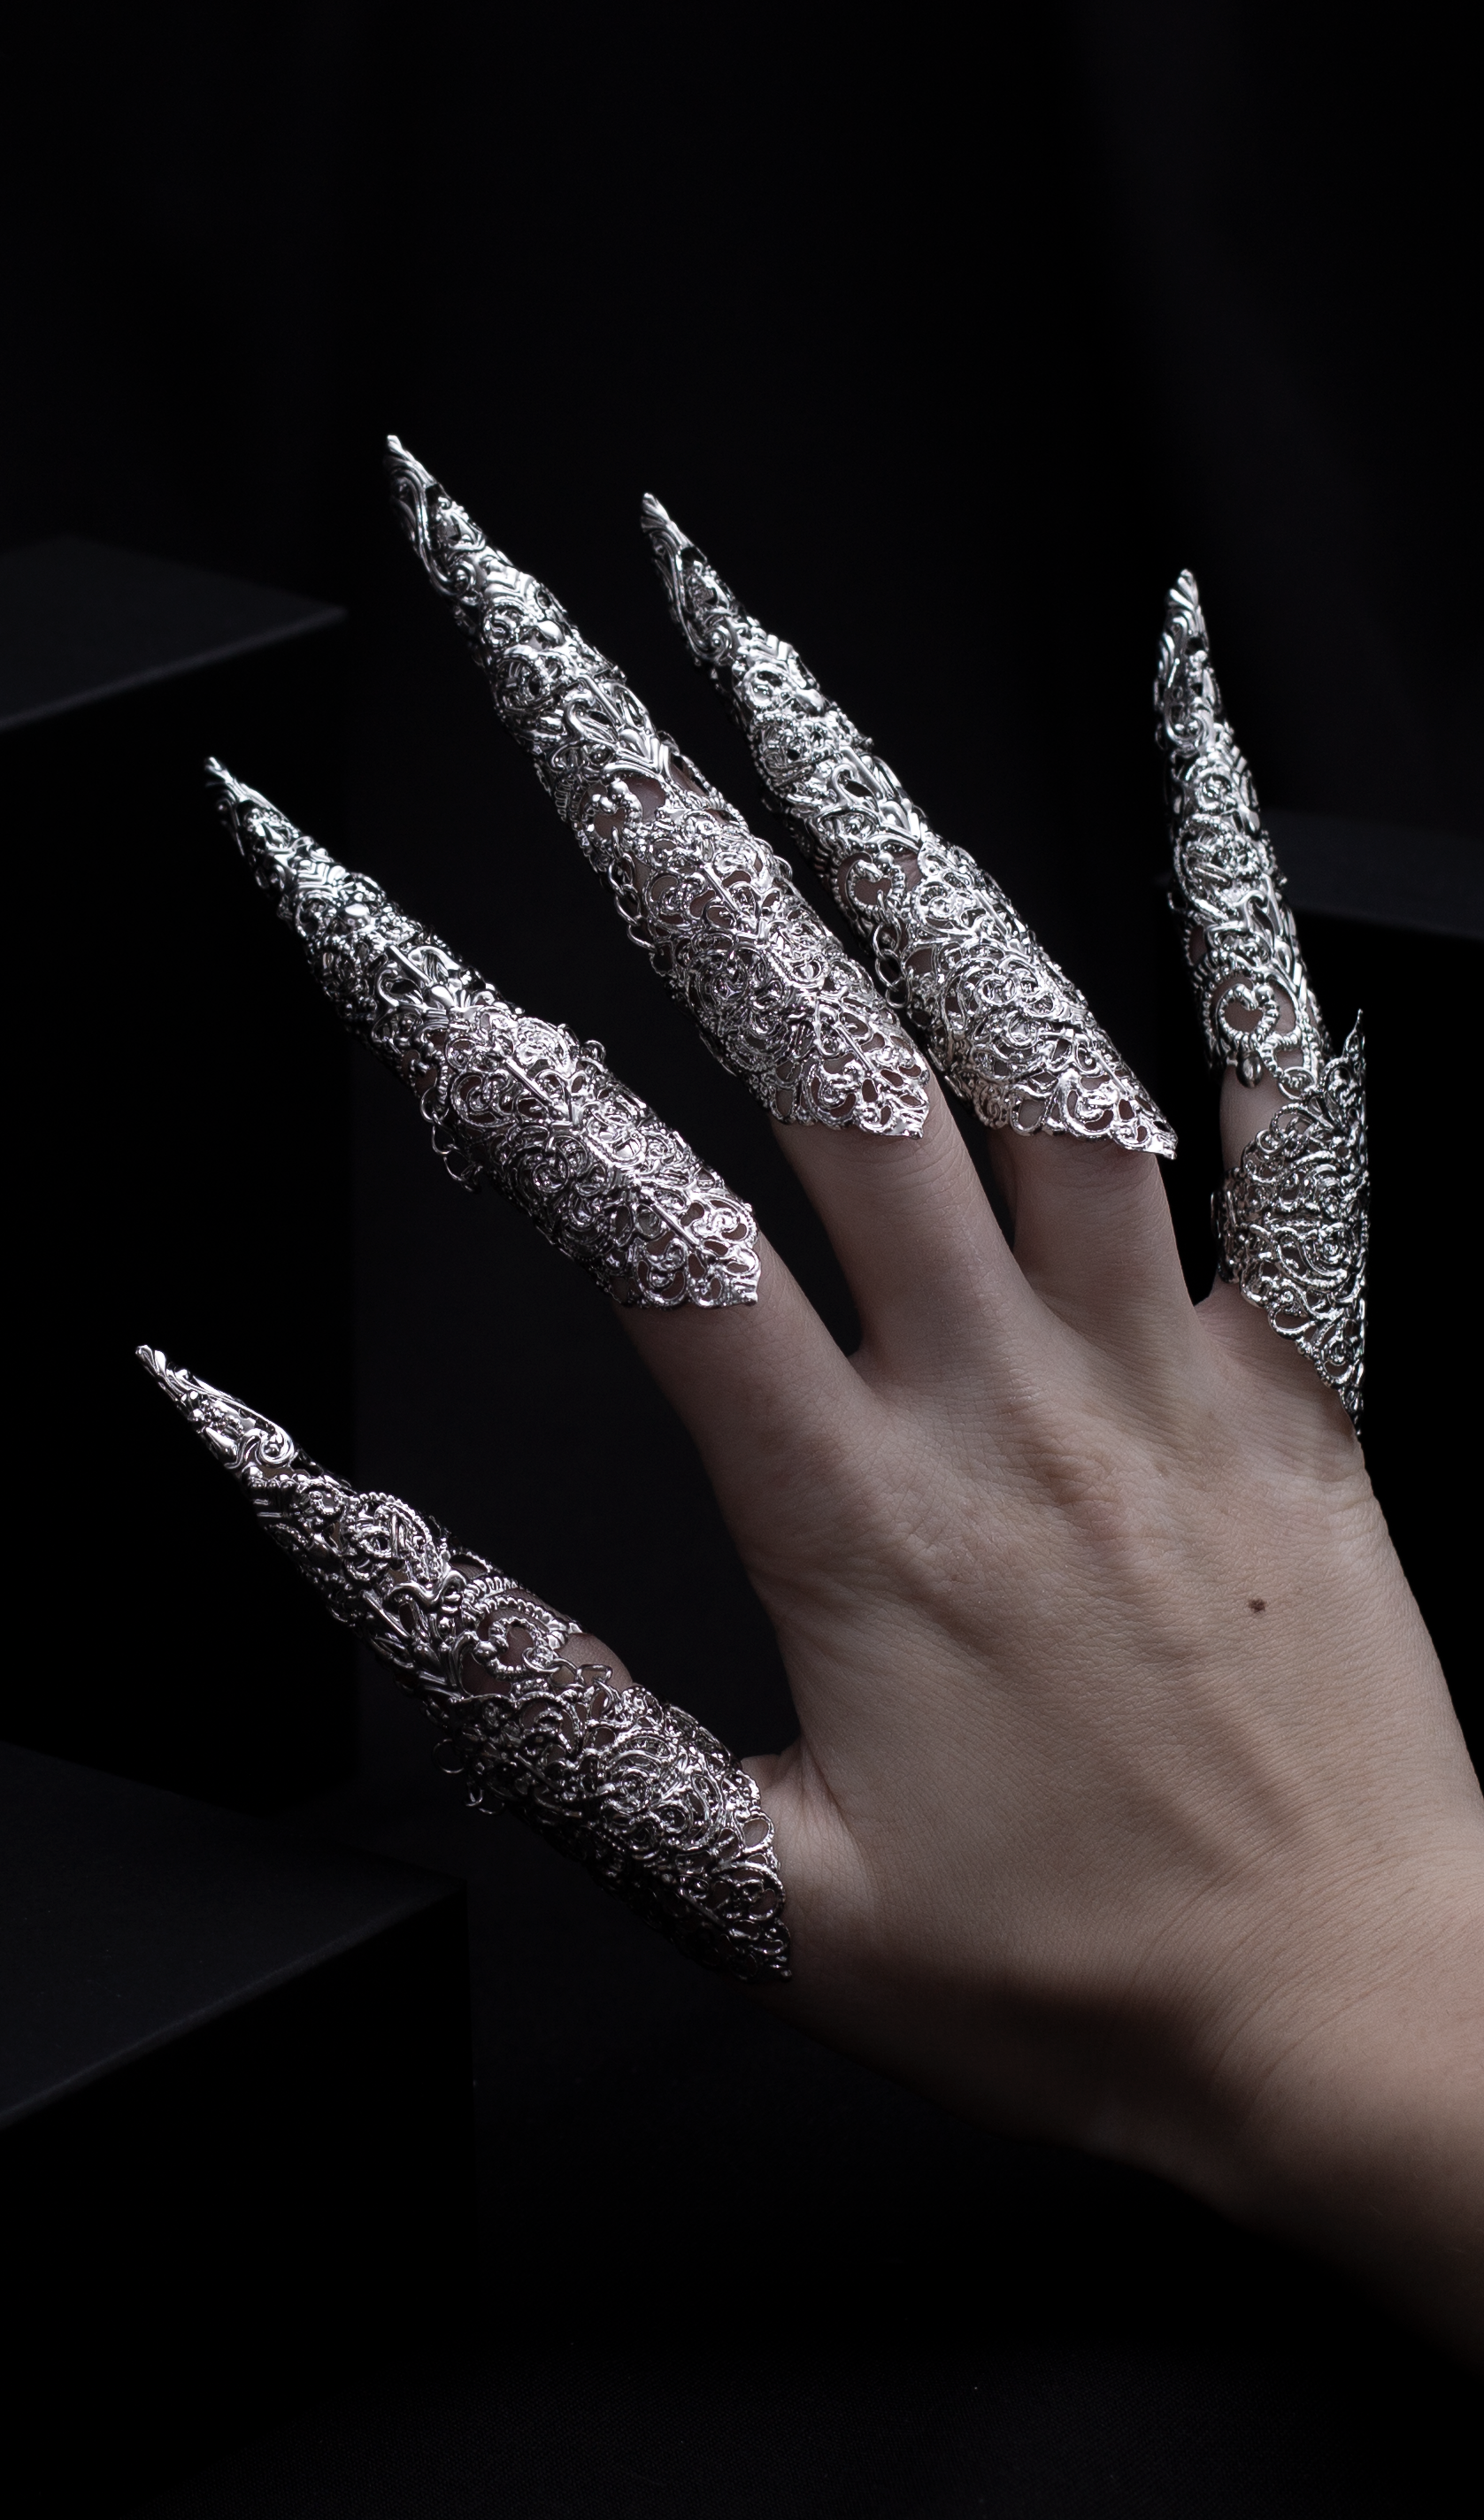 "A hand emerges from the shadows, flaunting Myril Jewels' midi rings with striking long claws, a perfect blend of neo-gothic flair and dark avant-garde elegance. This bold jewelry makes an ideal statement for Halloween, adding a touch of gothic-chic to any outfit.